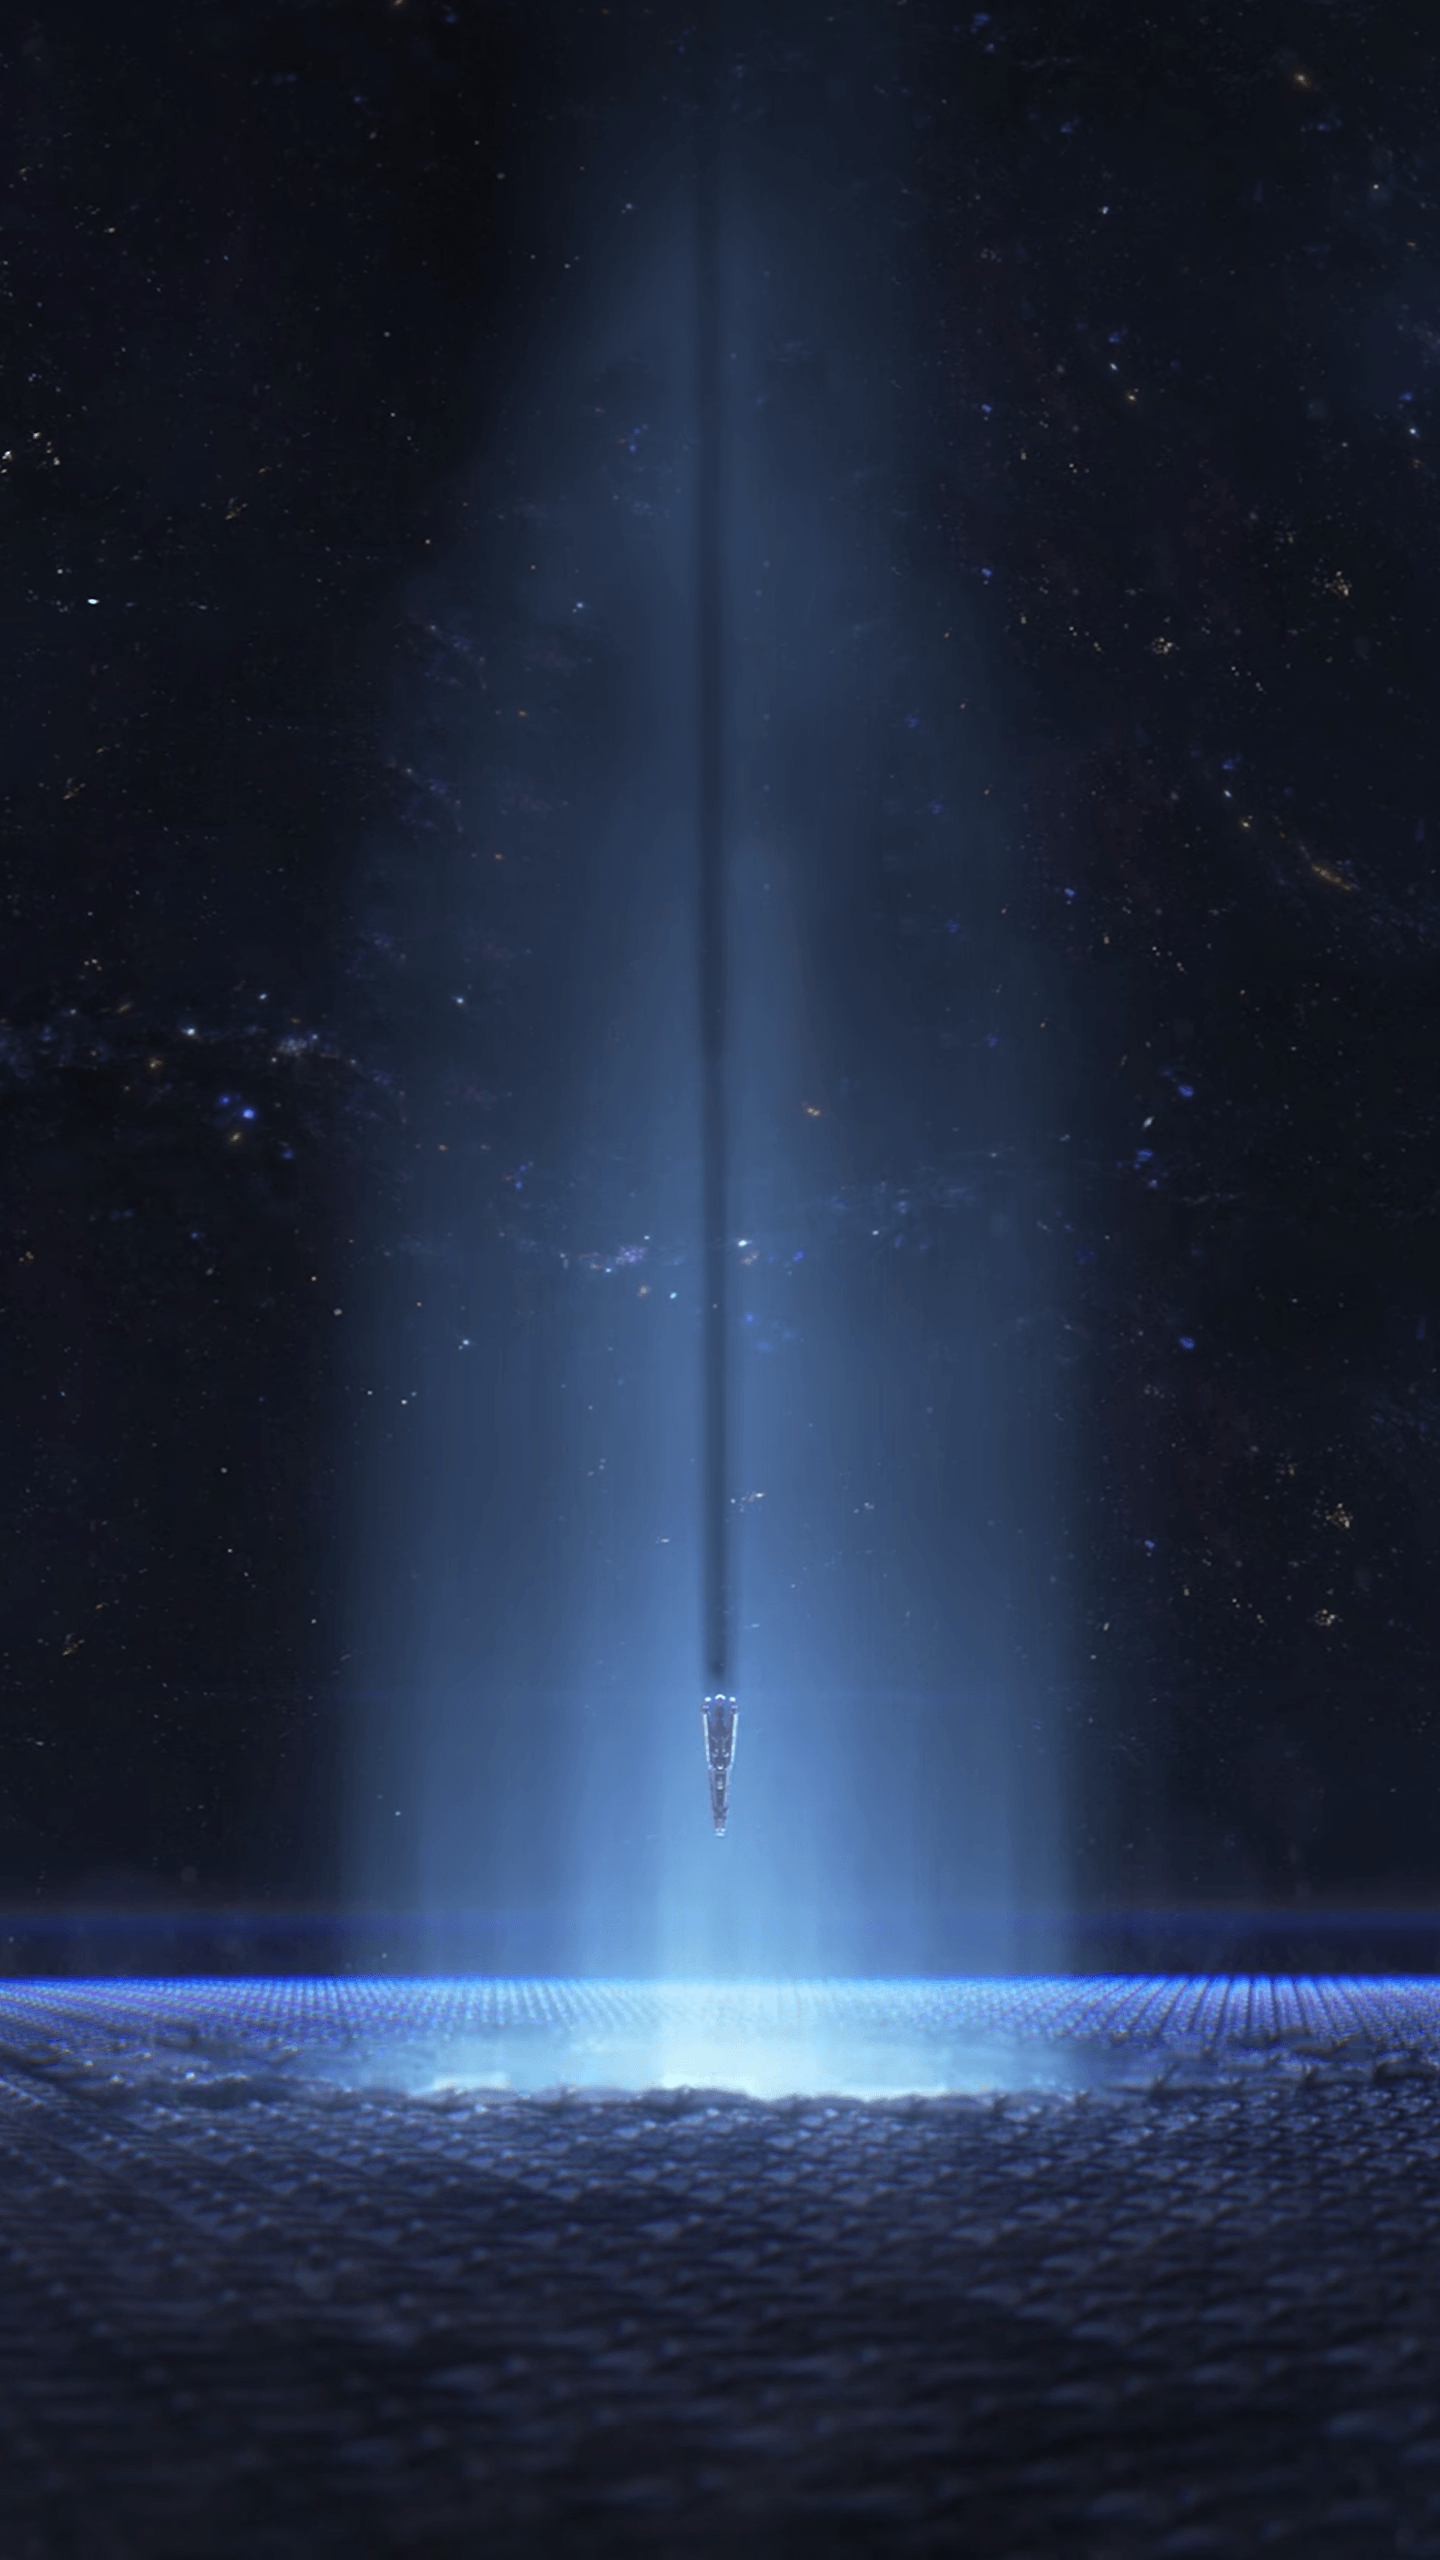 Mass Effect Andromeda mobile [1440x2560]. WALLPAPERS. Mass